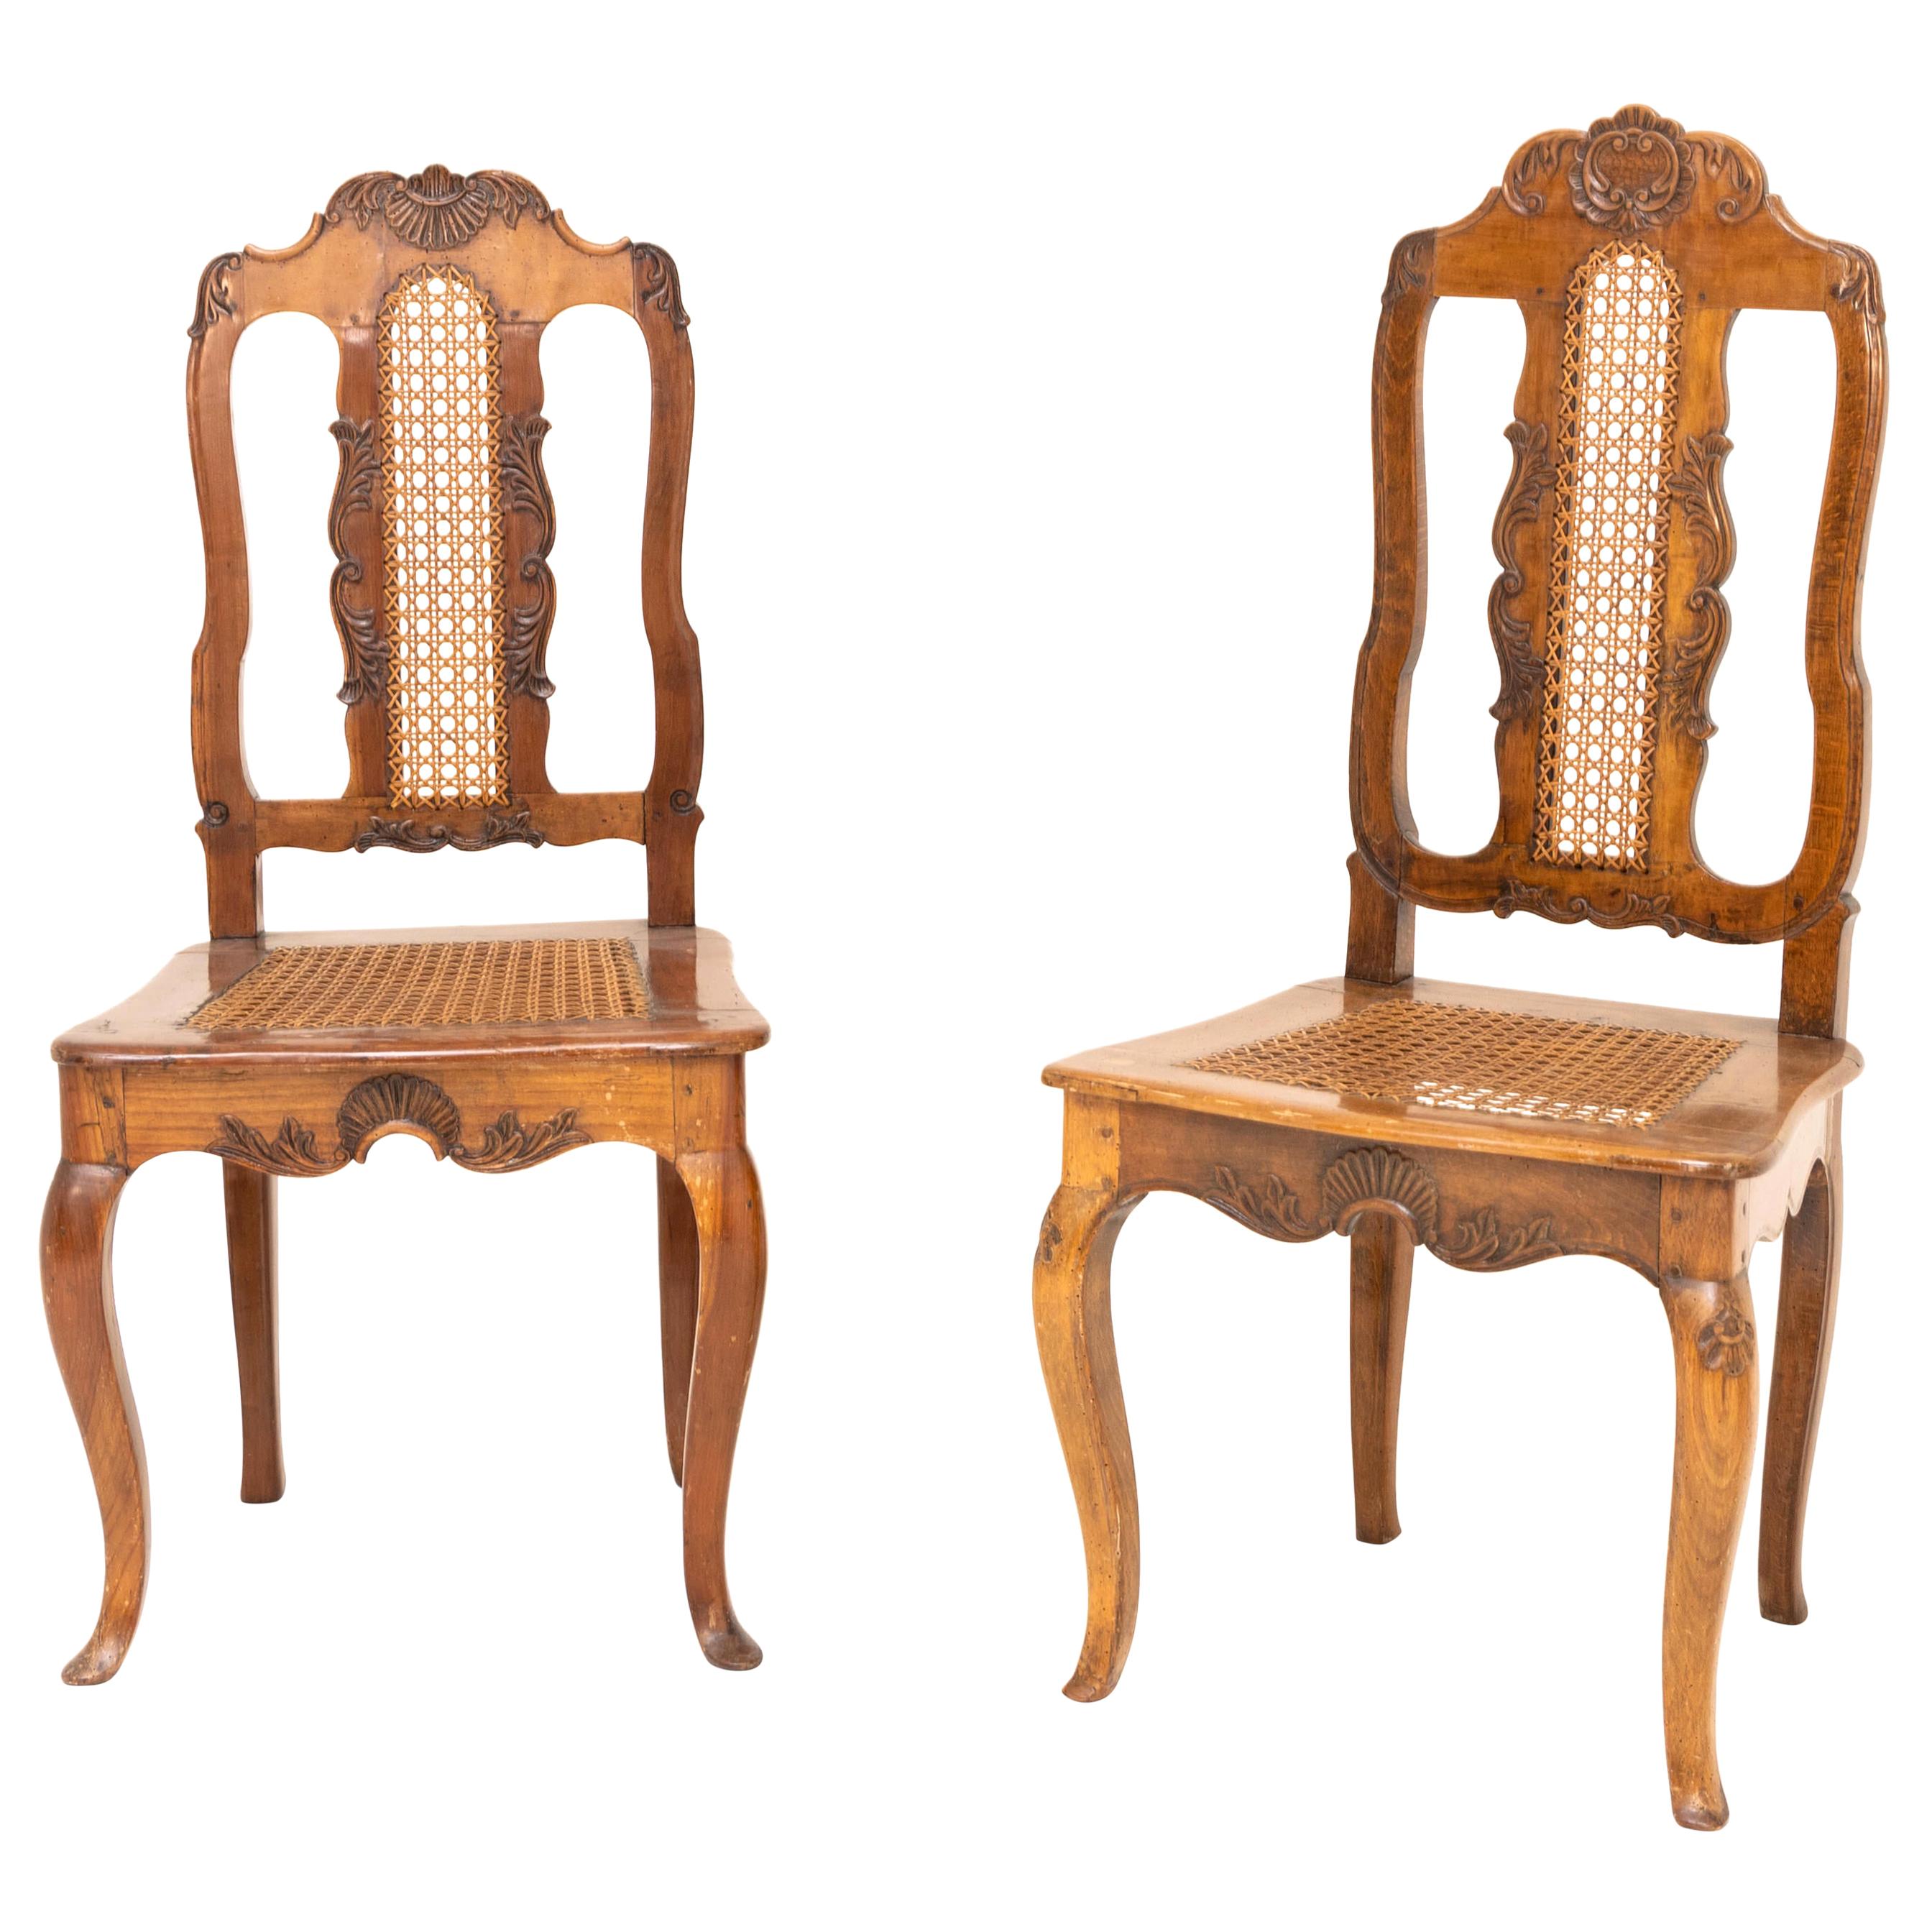 Two Baroque Chairs, Prob. Butzbach, Germany, Mid-18th Century